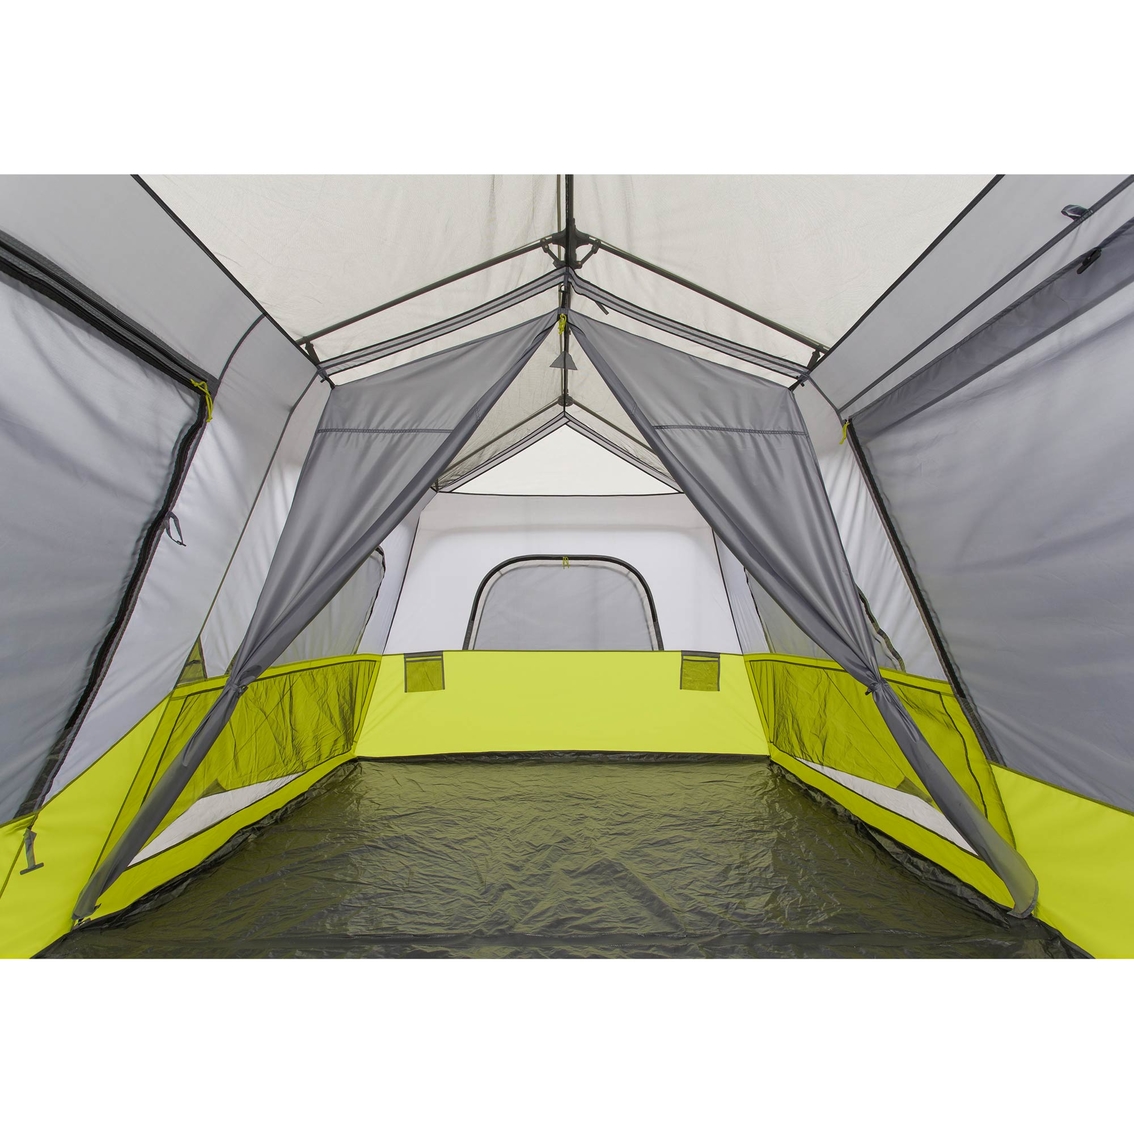 Core Equipment 9 Person Instant Cabin Tent - Image 7 of 10